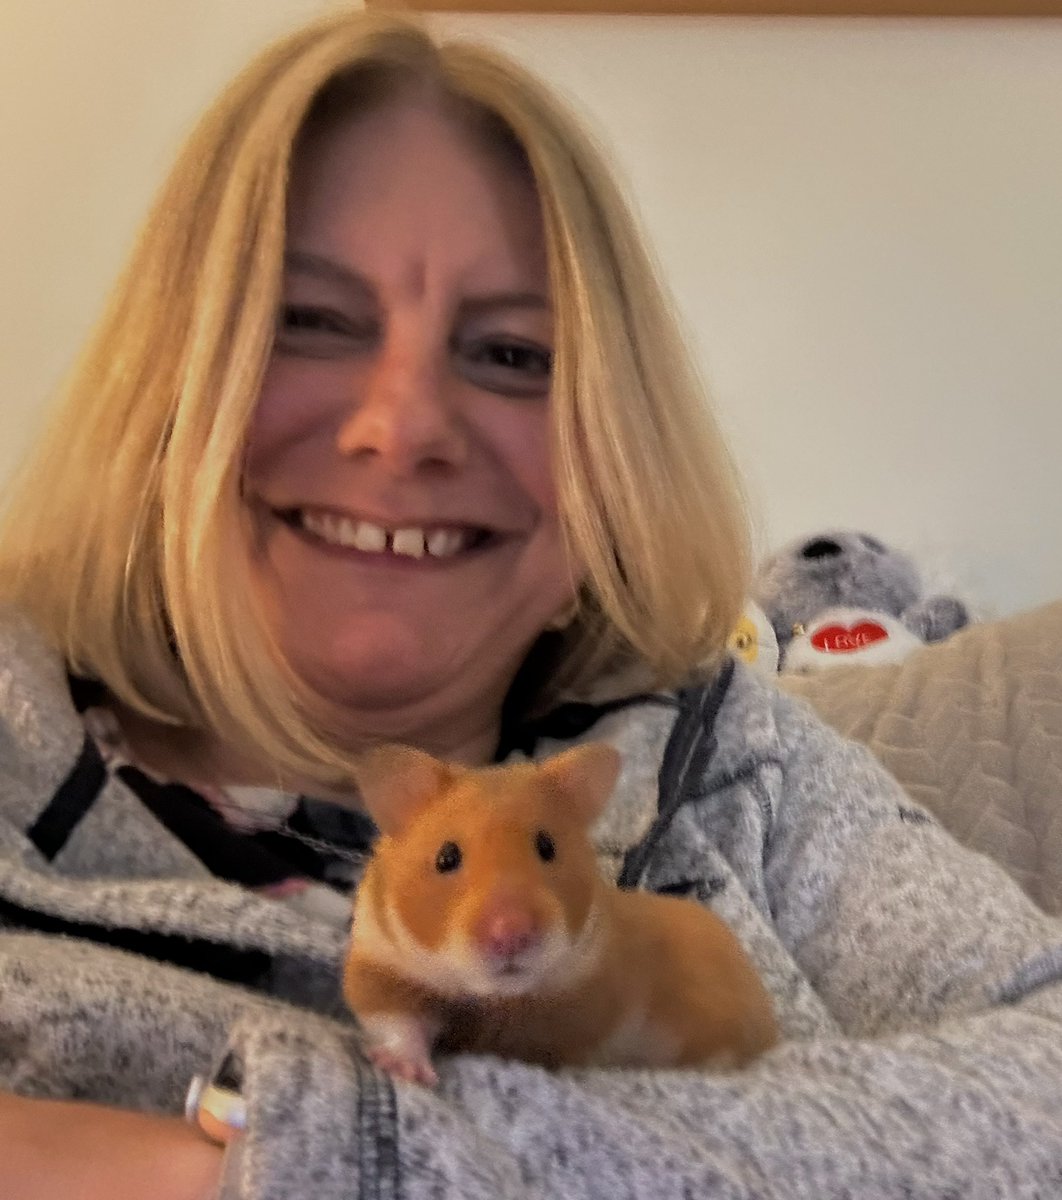 Henry hamster 🐹 training is now officially completed. He’s a friendly little poppet and even let me capture this selfie of the two of us. Look at his adorable little face ❤️🥰